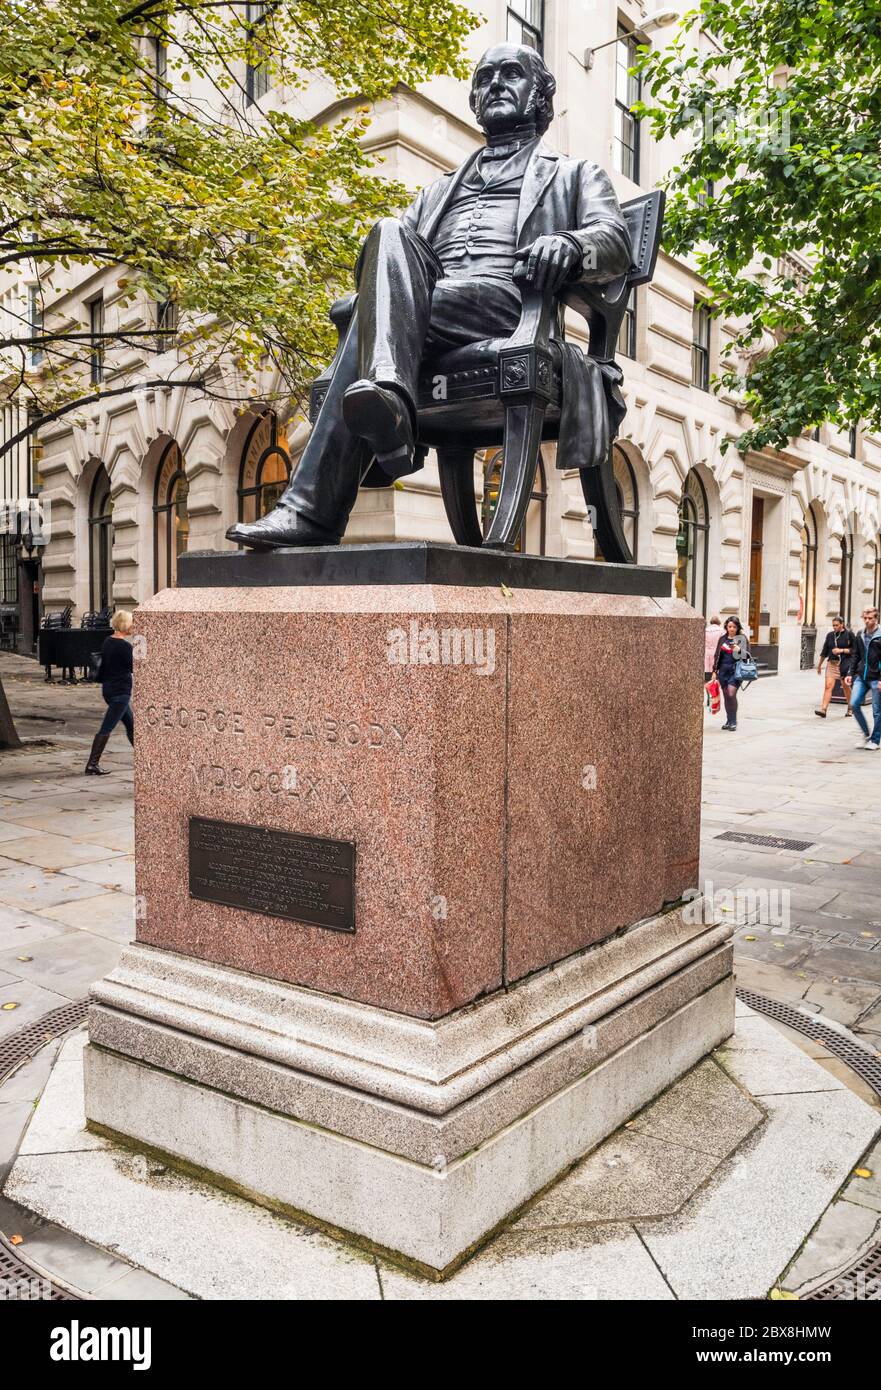 Statue of American financier and philanthropist George Peabody, sculpted by William Wetmore Story, near the Roayal Exchange, London, England, UK. Stock Photo